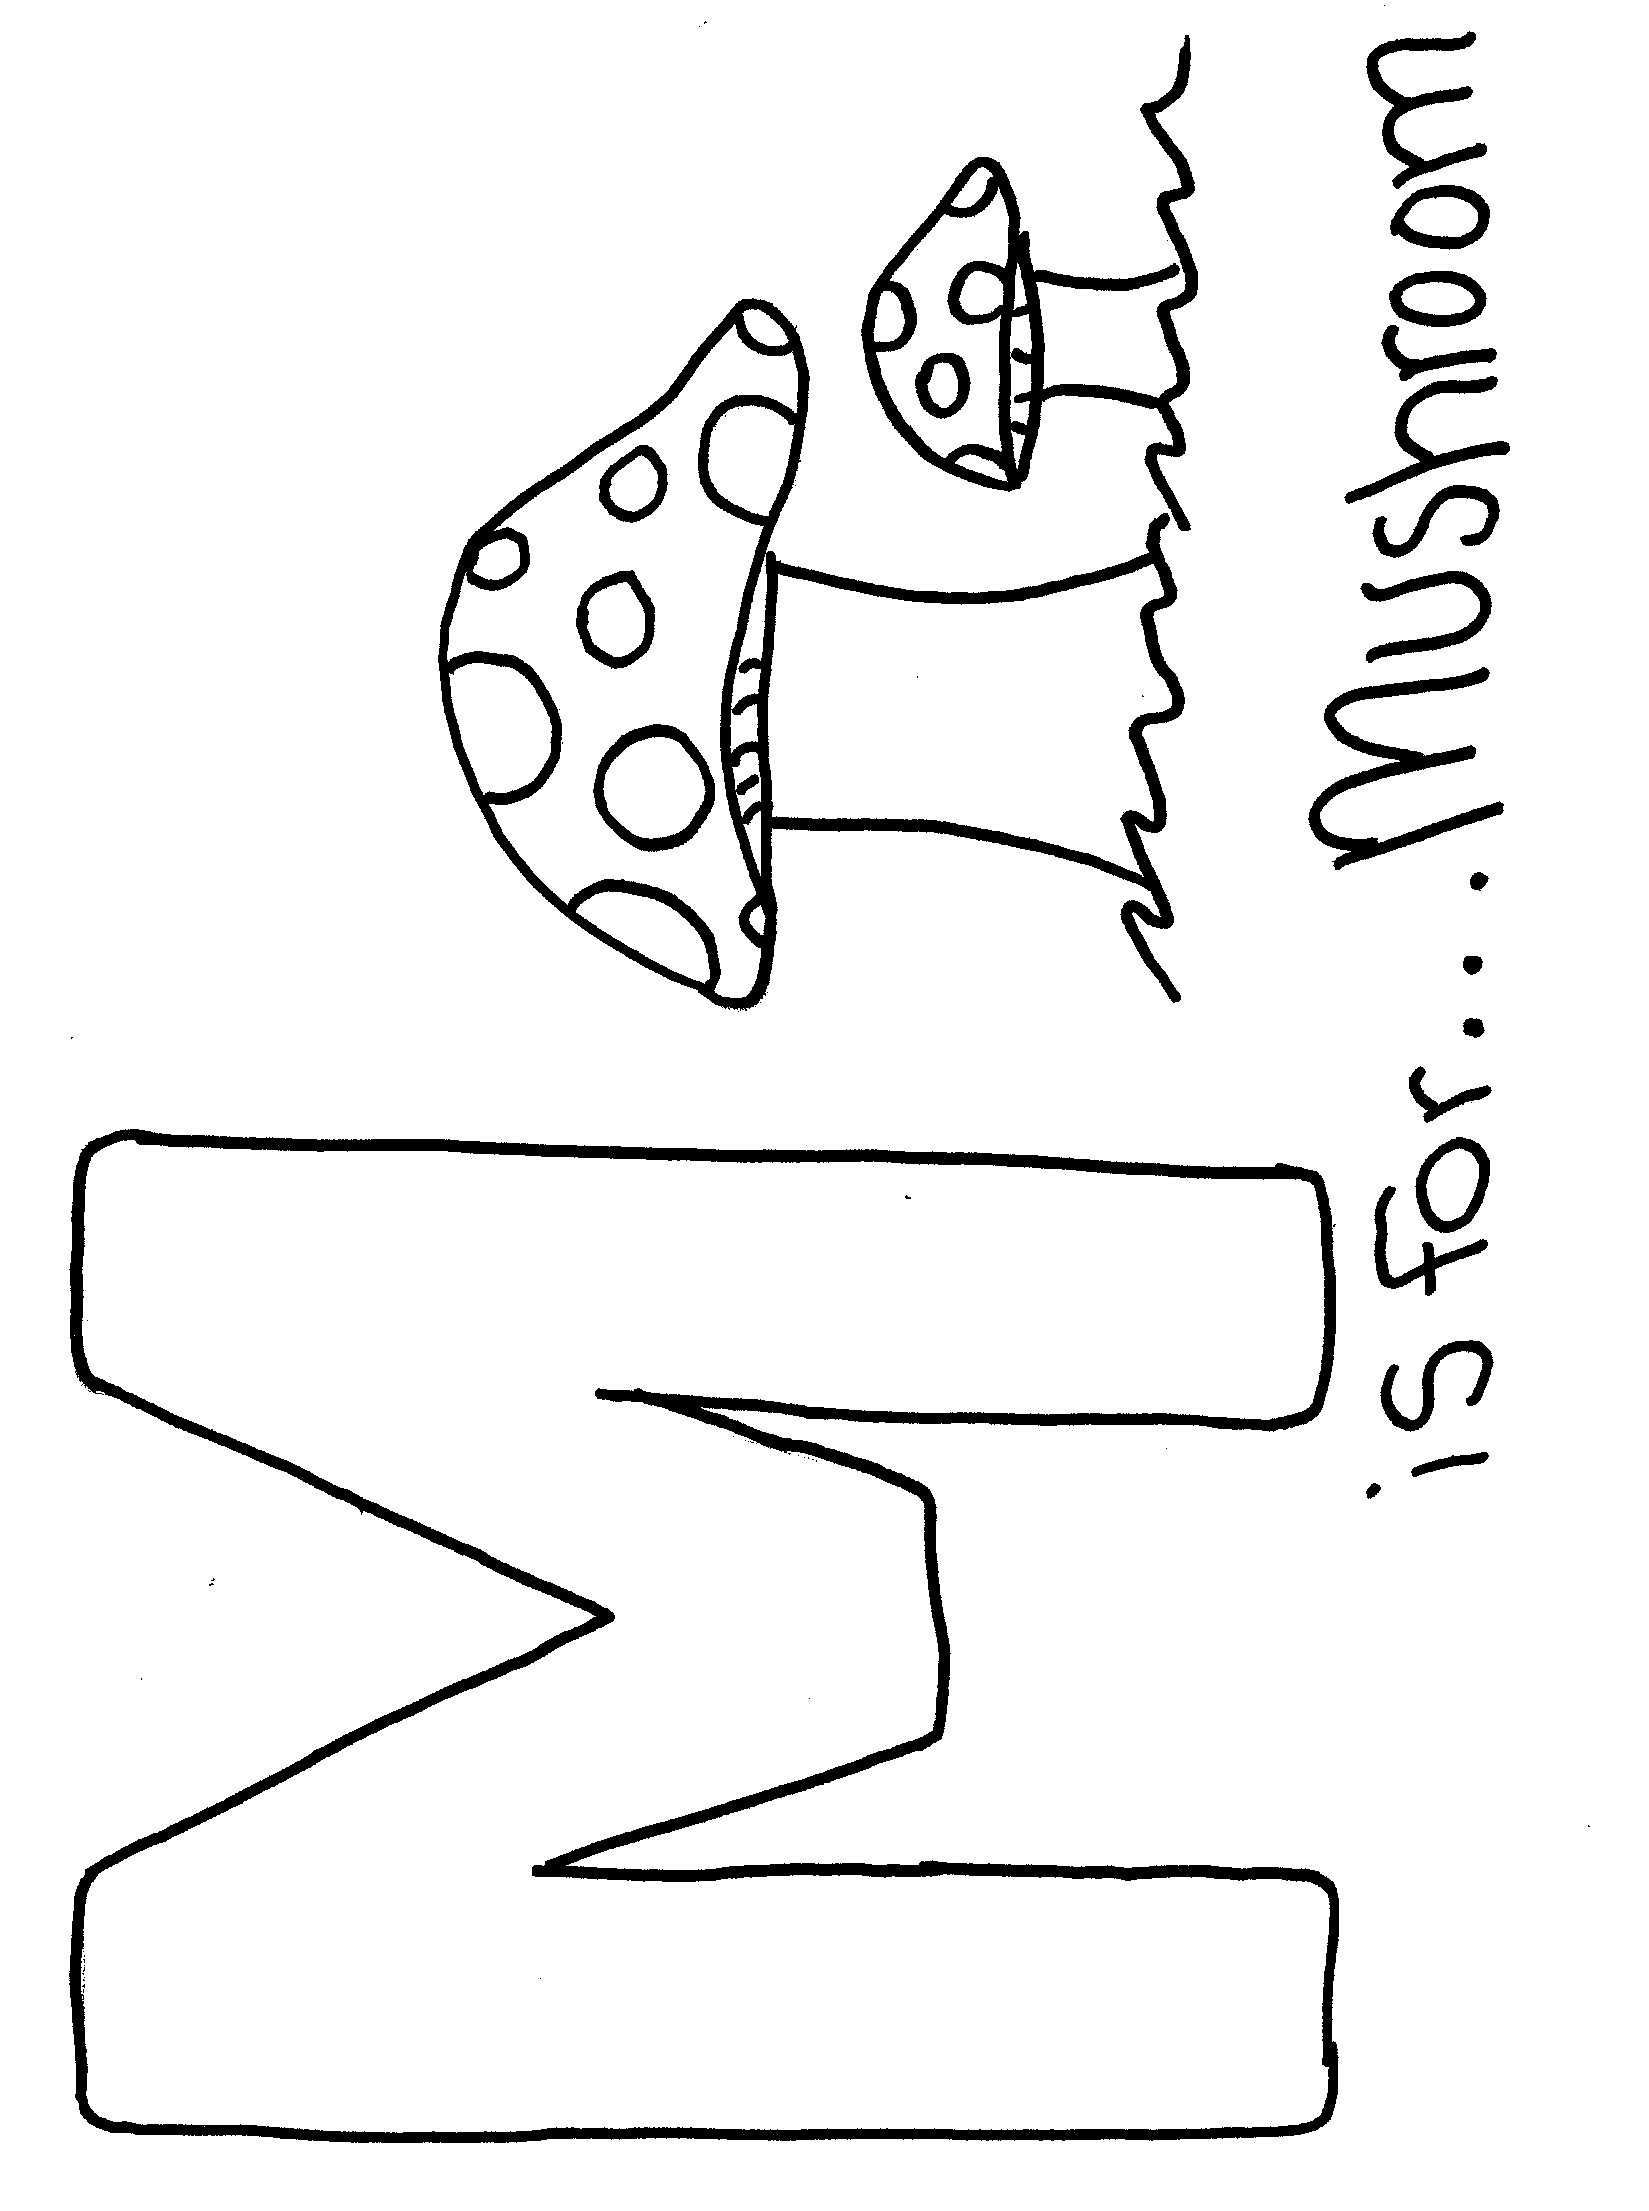 free-alphabet-coloring-page-m-is-for-mushroom